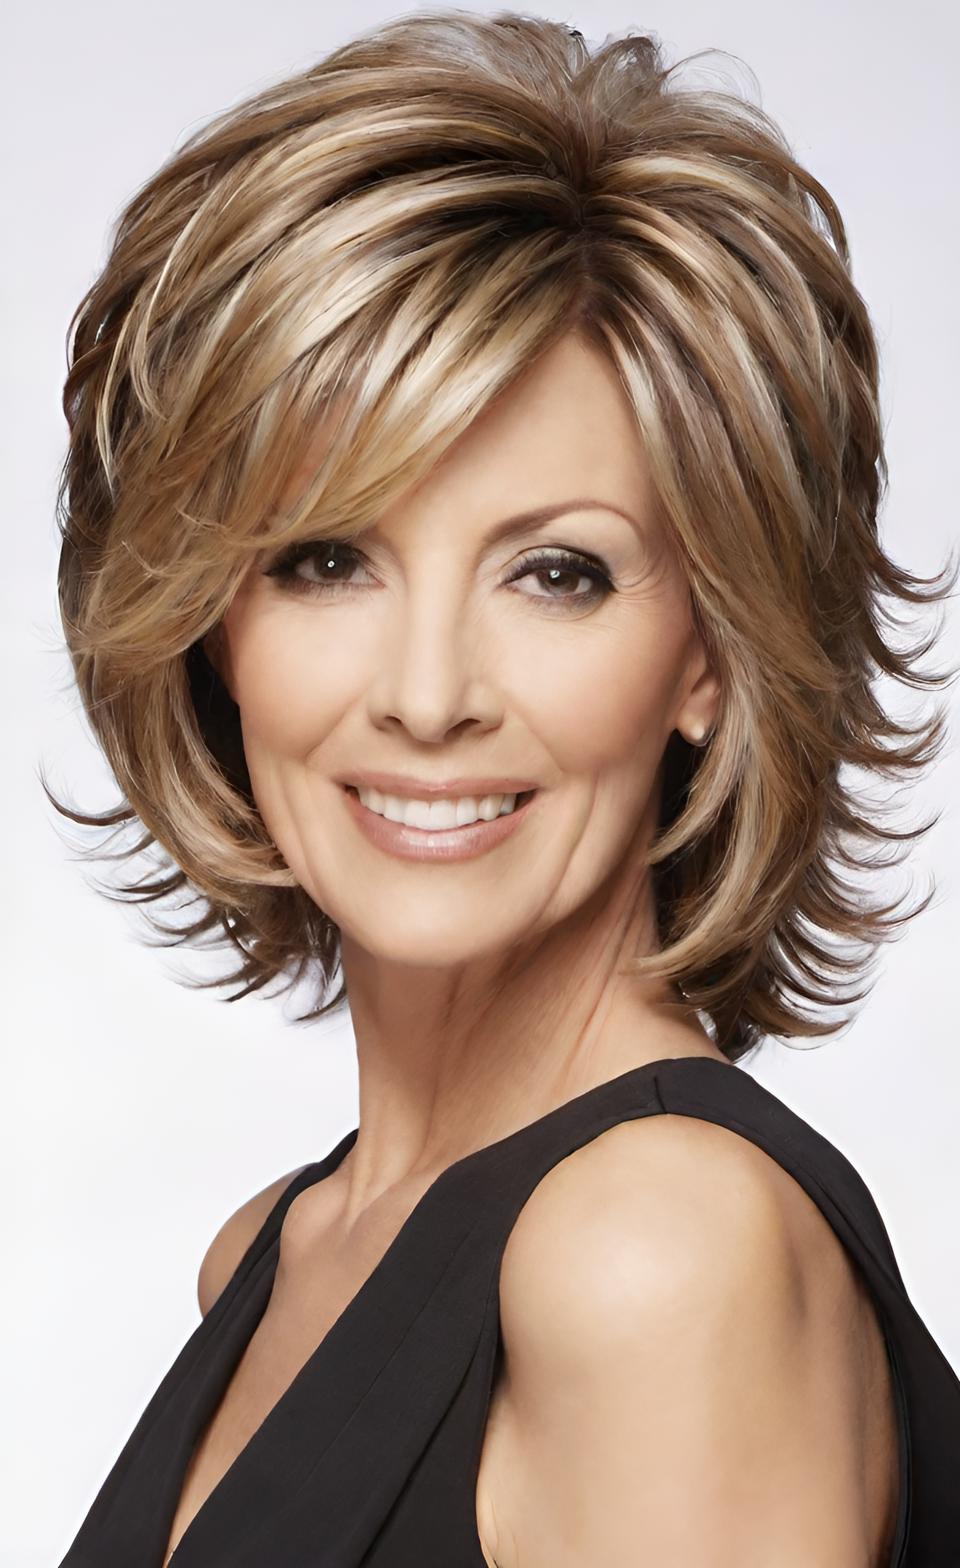 Best Hairstyles for Women Over 40